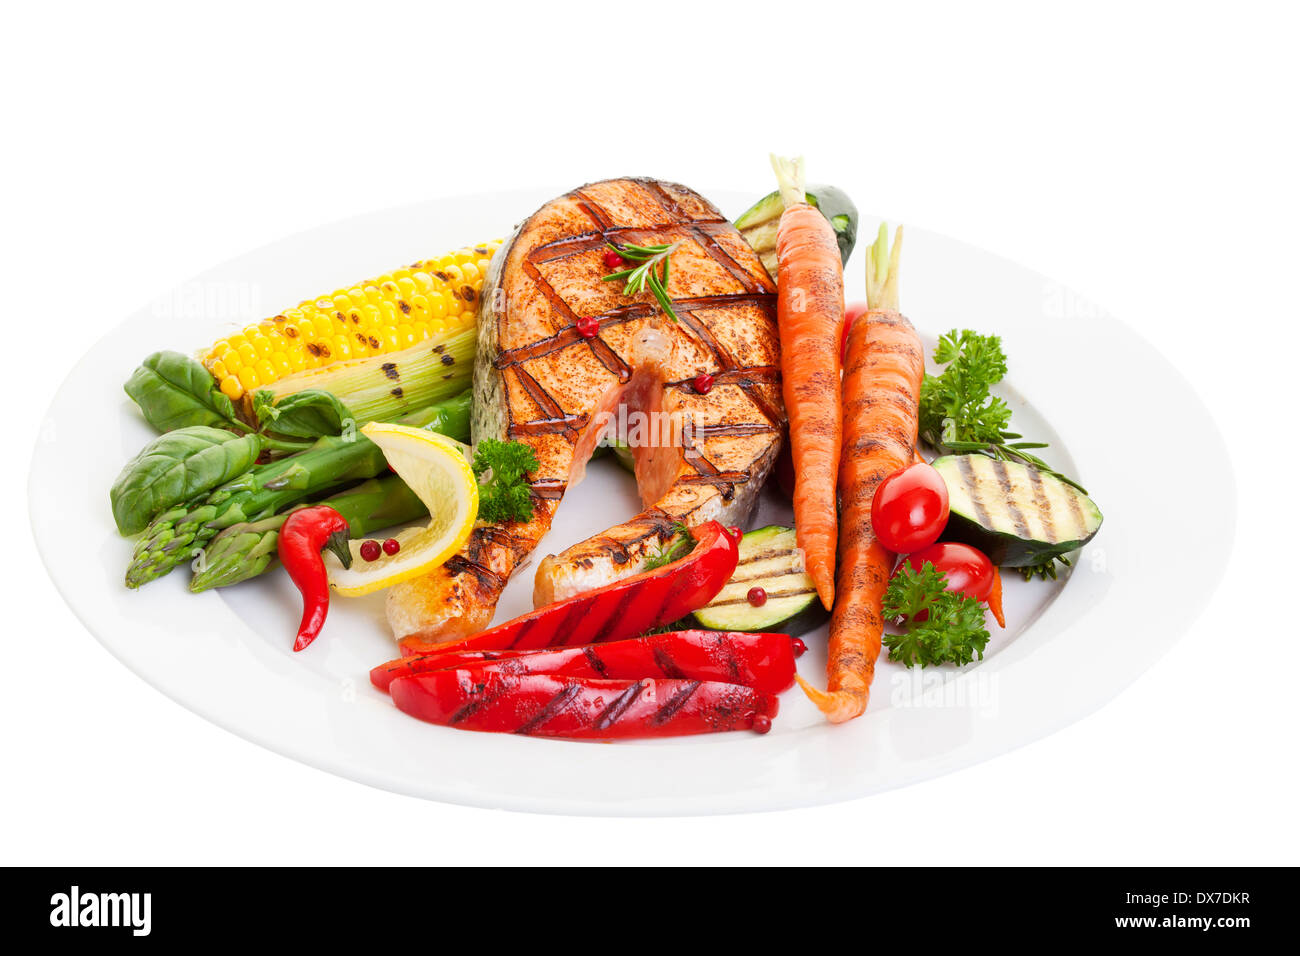 Grilled salmon steak with vegetables corn and asparagus Stock Photo